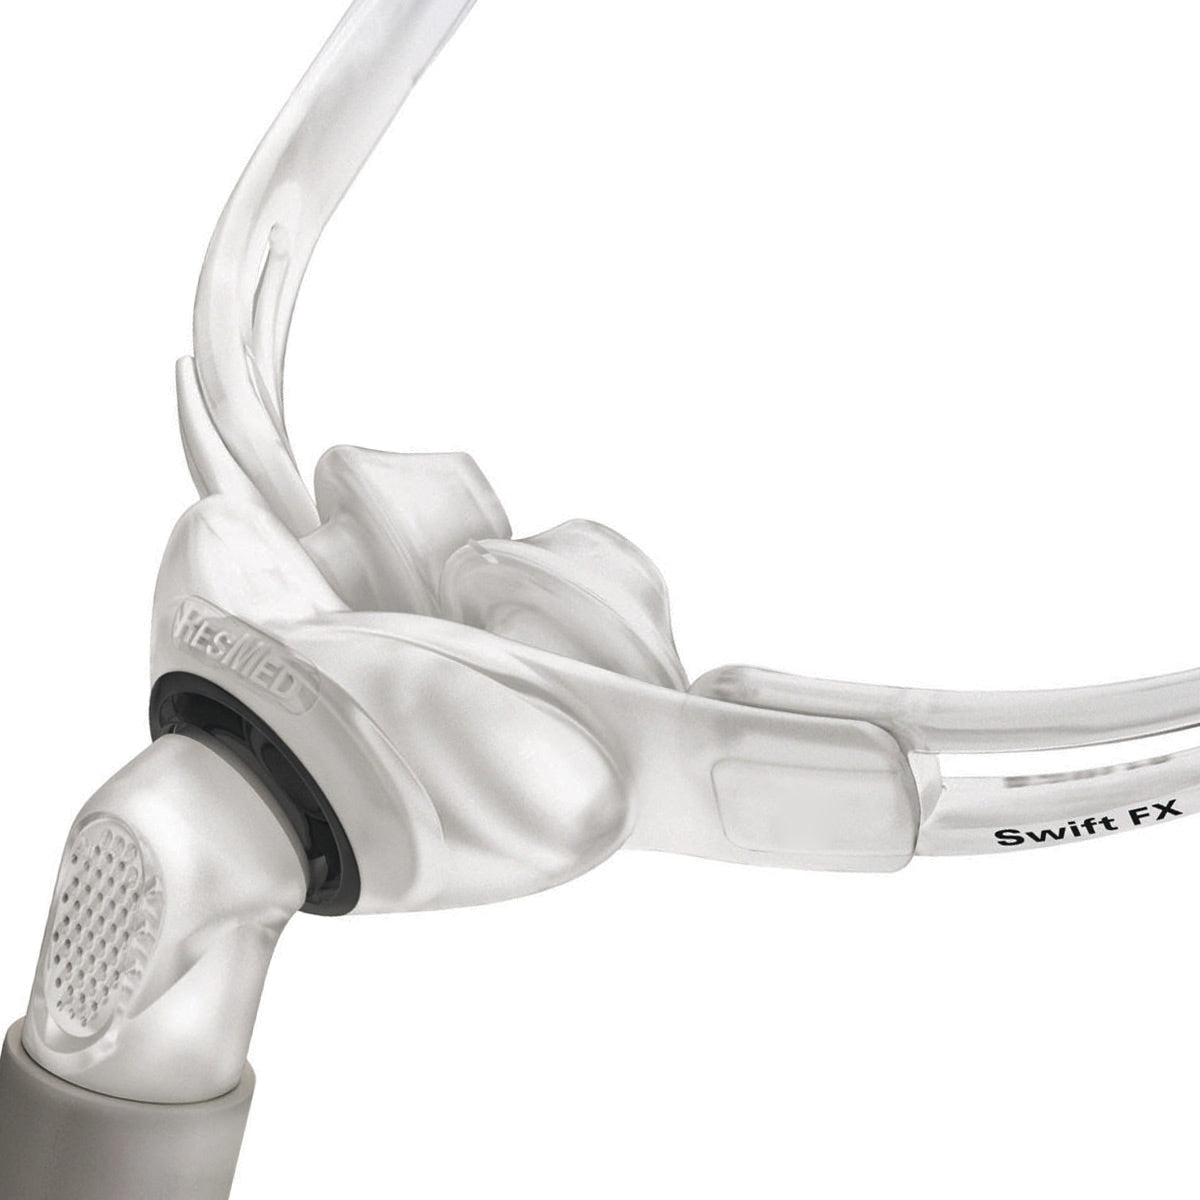 Closeup view of nasal pillows from ResMed Swift FX Complete Mask.